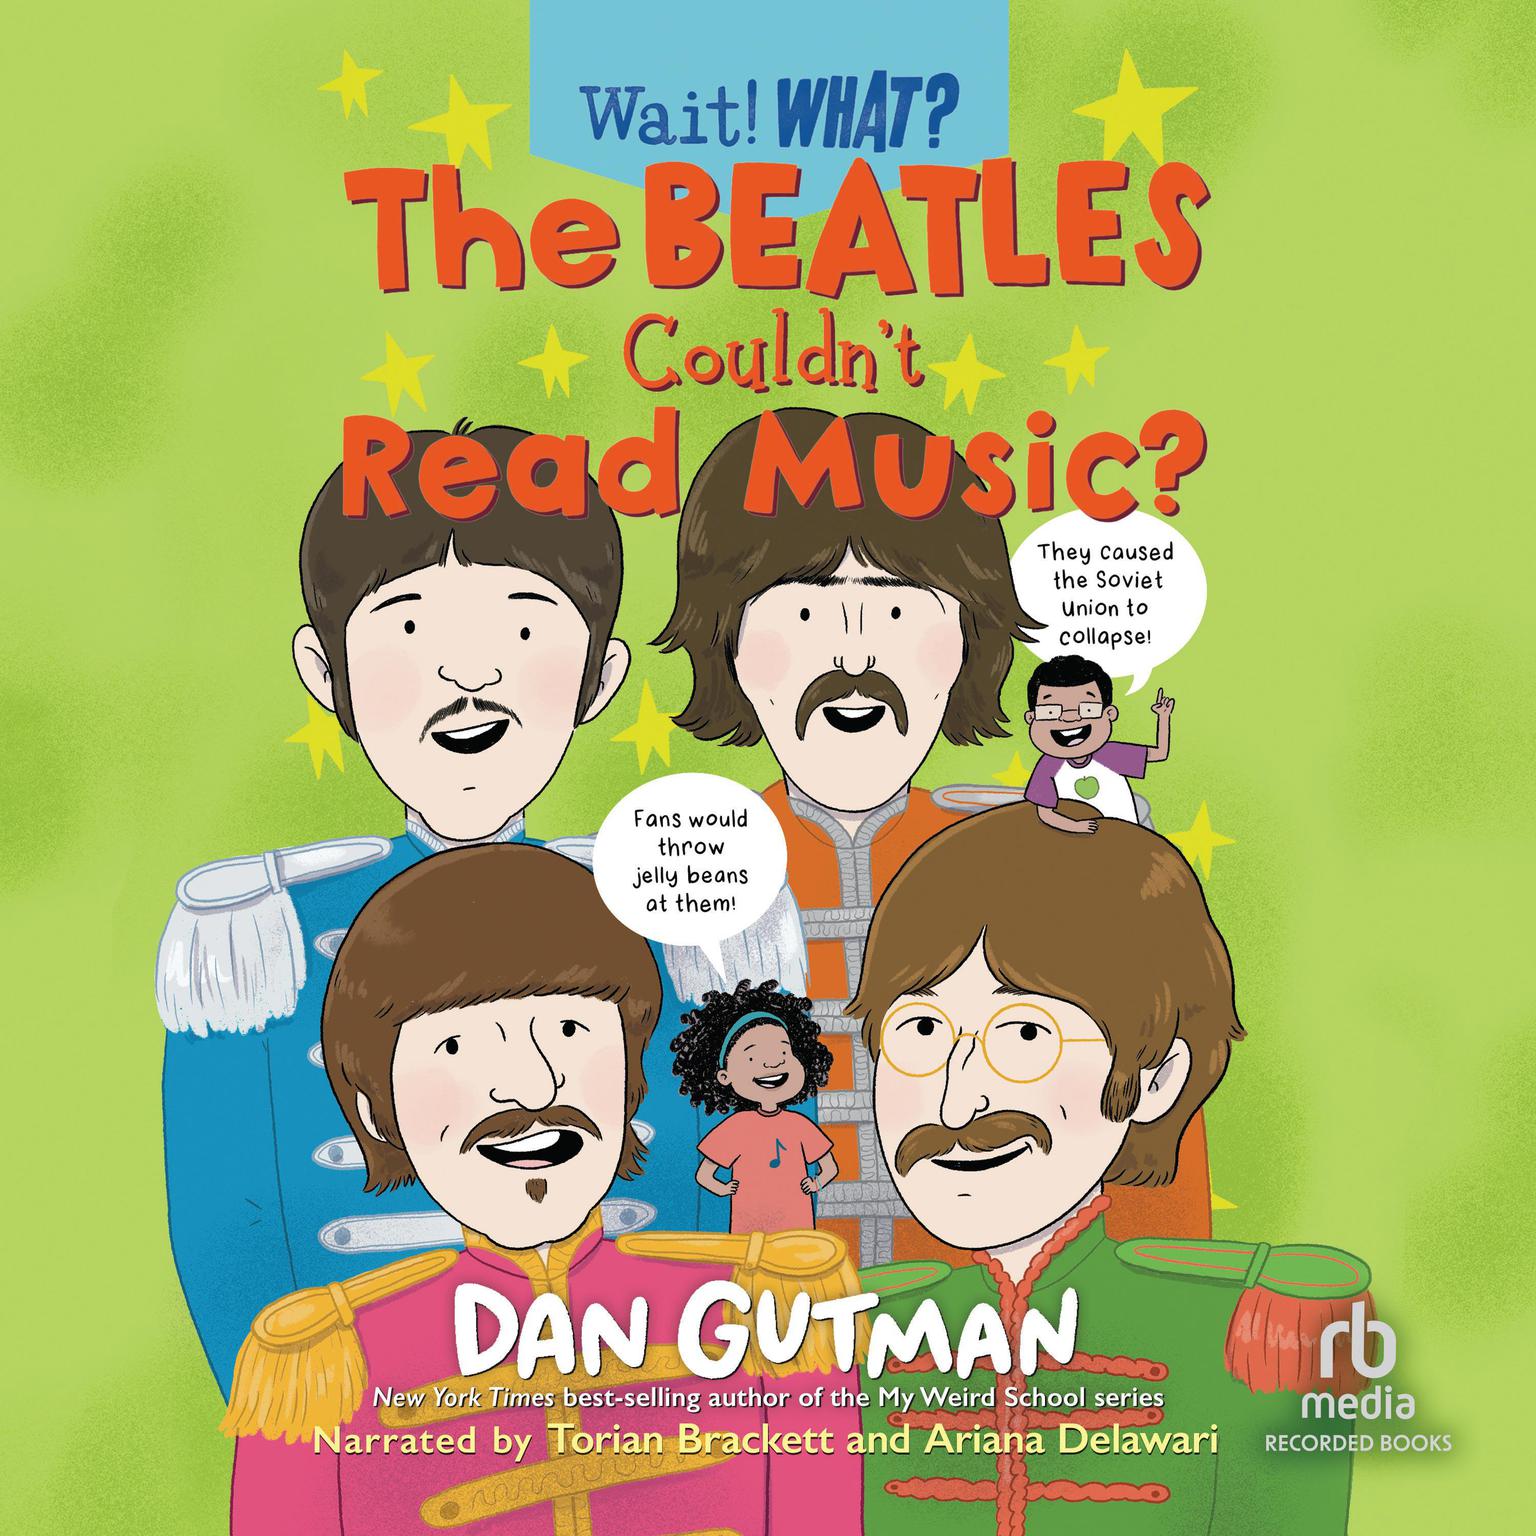 The Beatles Couldnt Read Music: Wait, What? Audiobook, by Dan Gutman